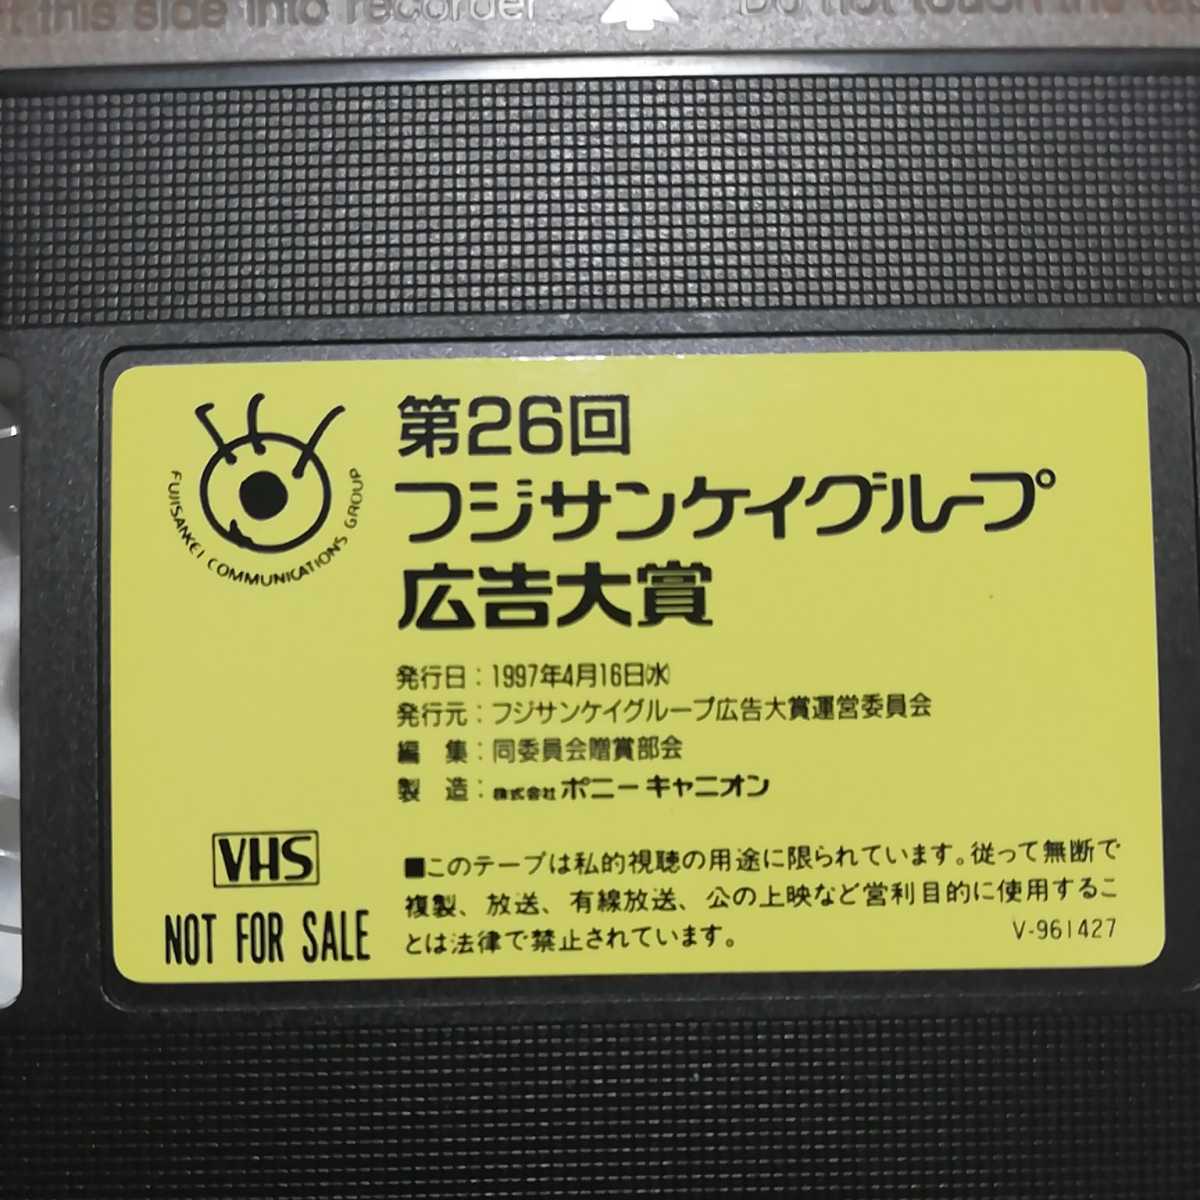 VHS no. 26 times Fuji sun Kei group advertisement large . winning work compilation * TV radio CM commercial * soft case none if cat pohs shipping possibility.